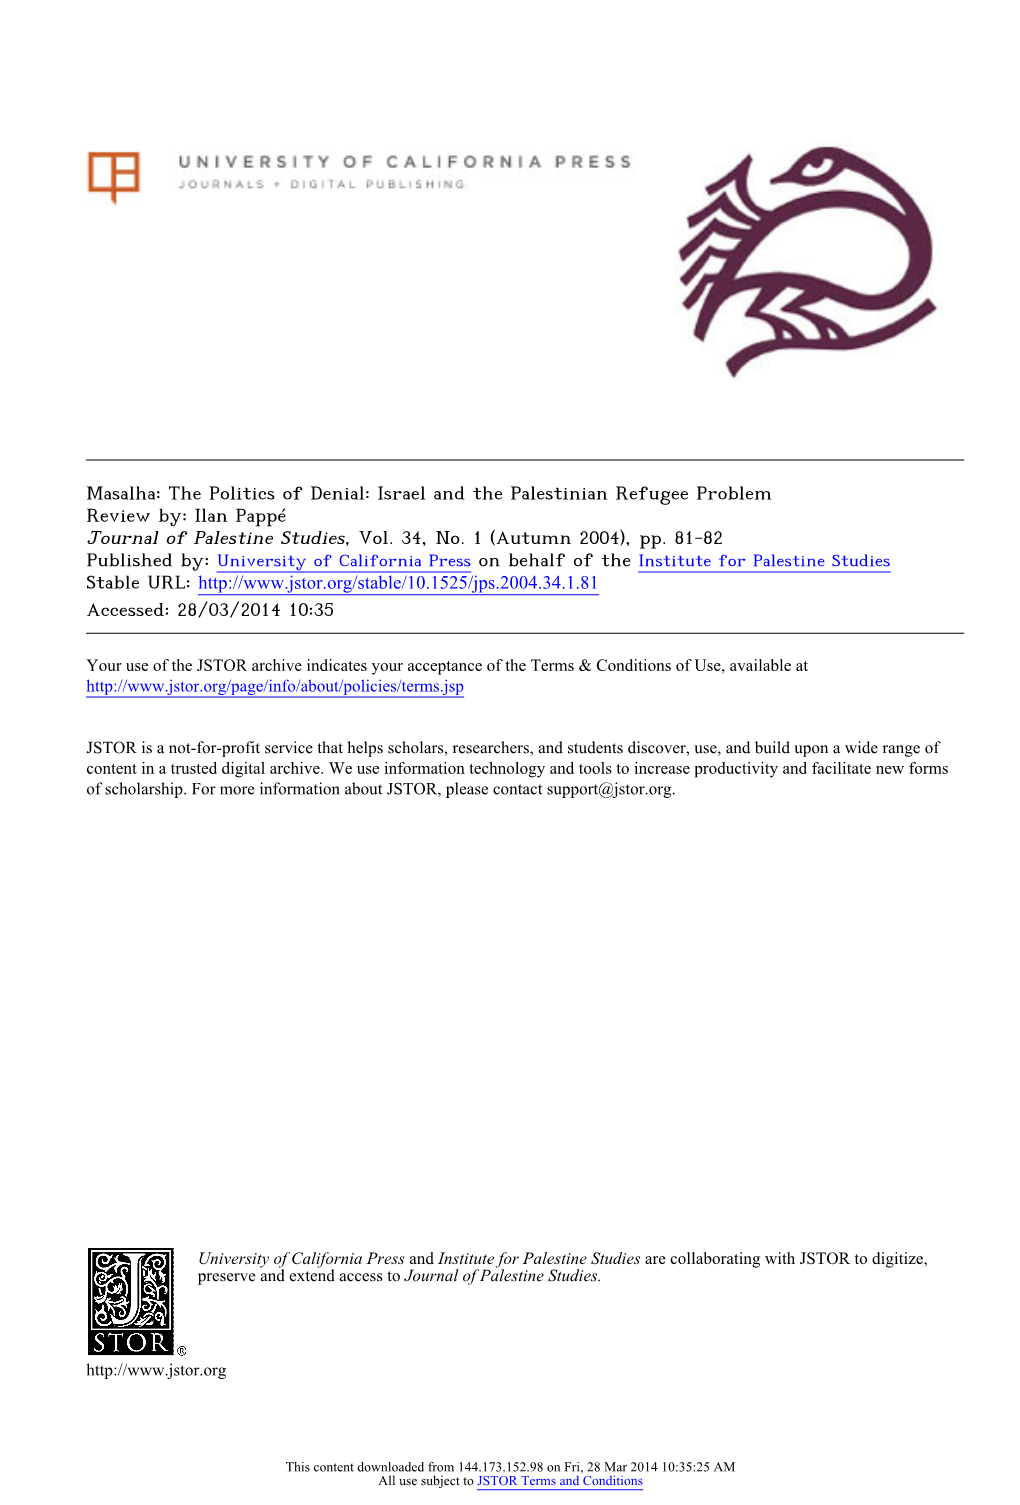 Masalha: the Politics of Denial: Israel and the Palestinian Refugee Problem Review By: Ilan Pappé Journal of Palestine Studies, Vol